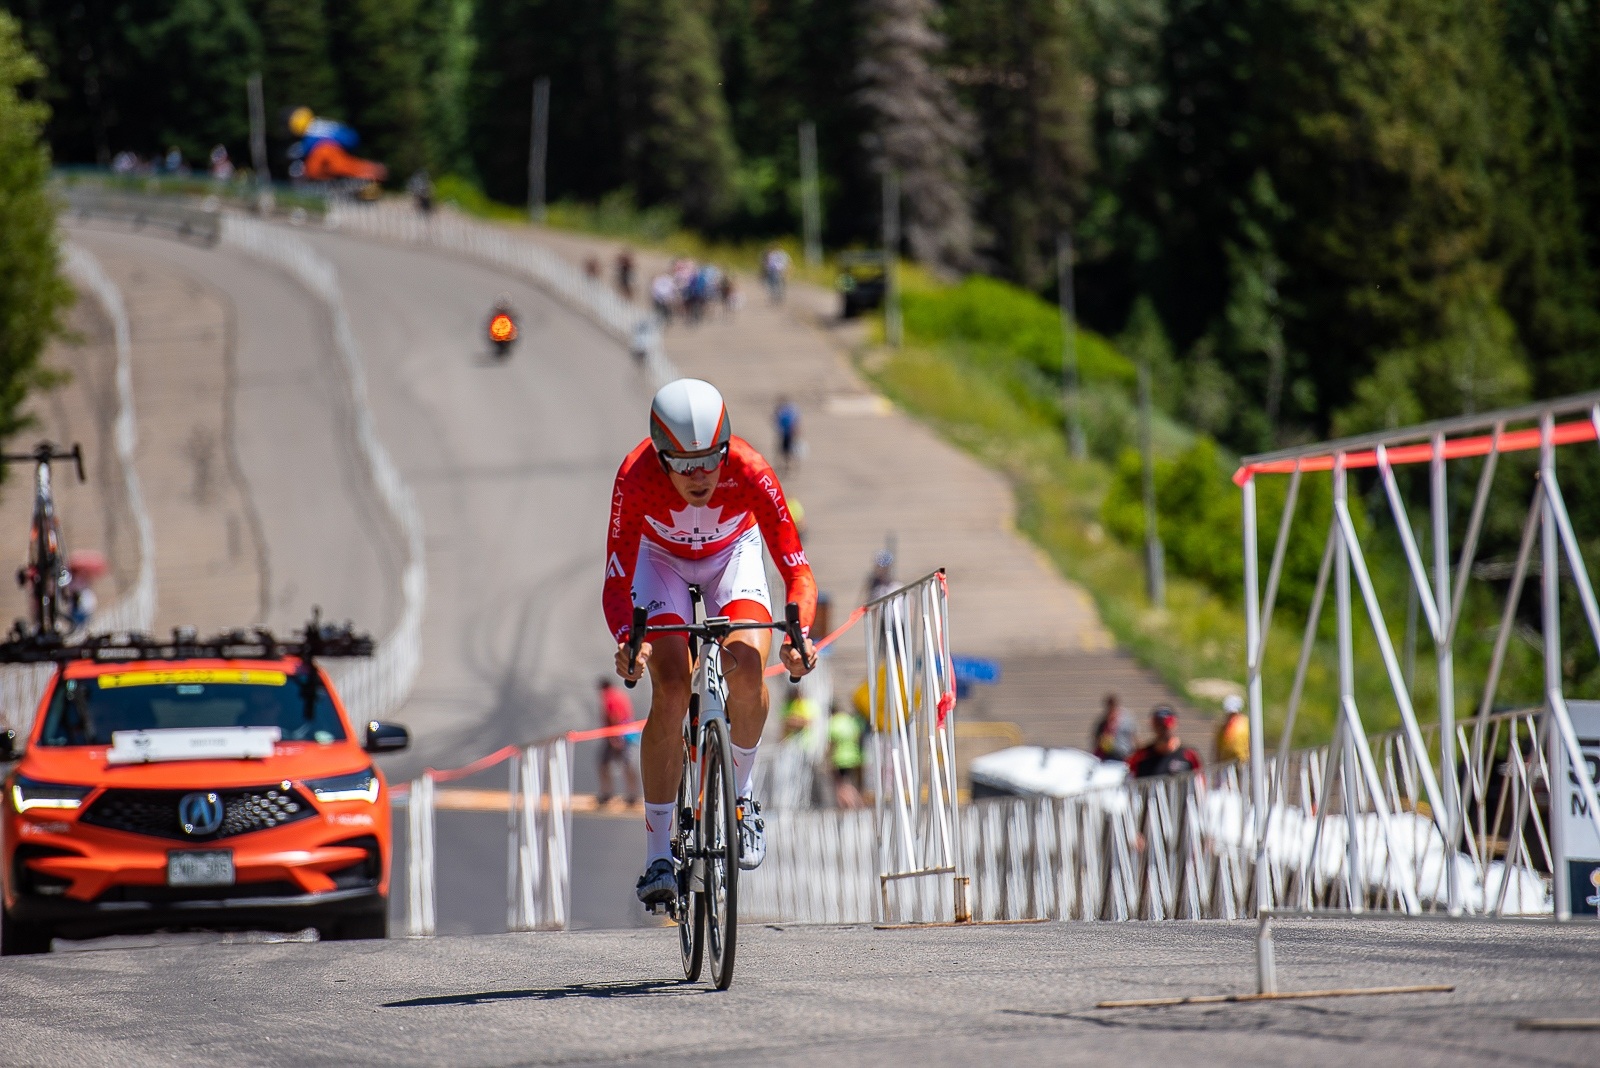 2017 Tour of Utah winner Rob Britton (Rally UHC Cycling) during the Prologue time trial. 2019 Tour of Utah. Photo by Steven L. Sheffield